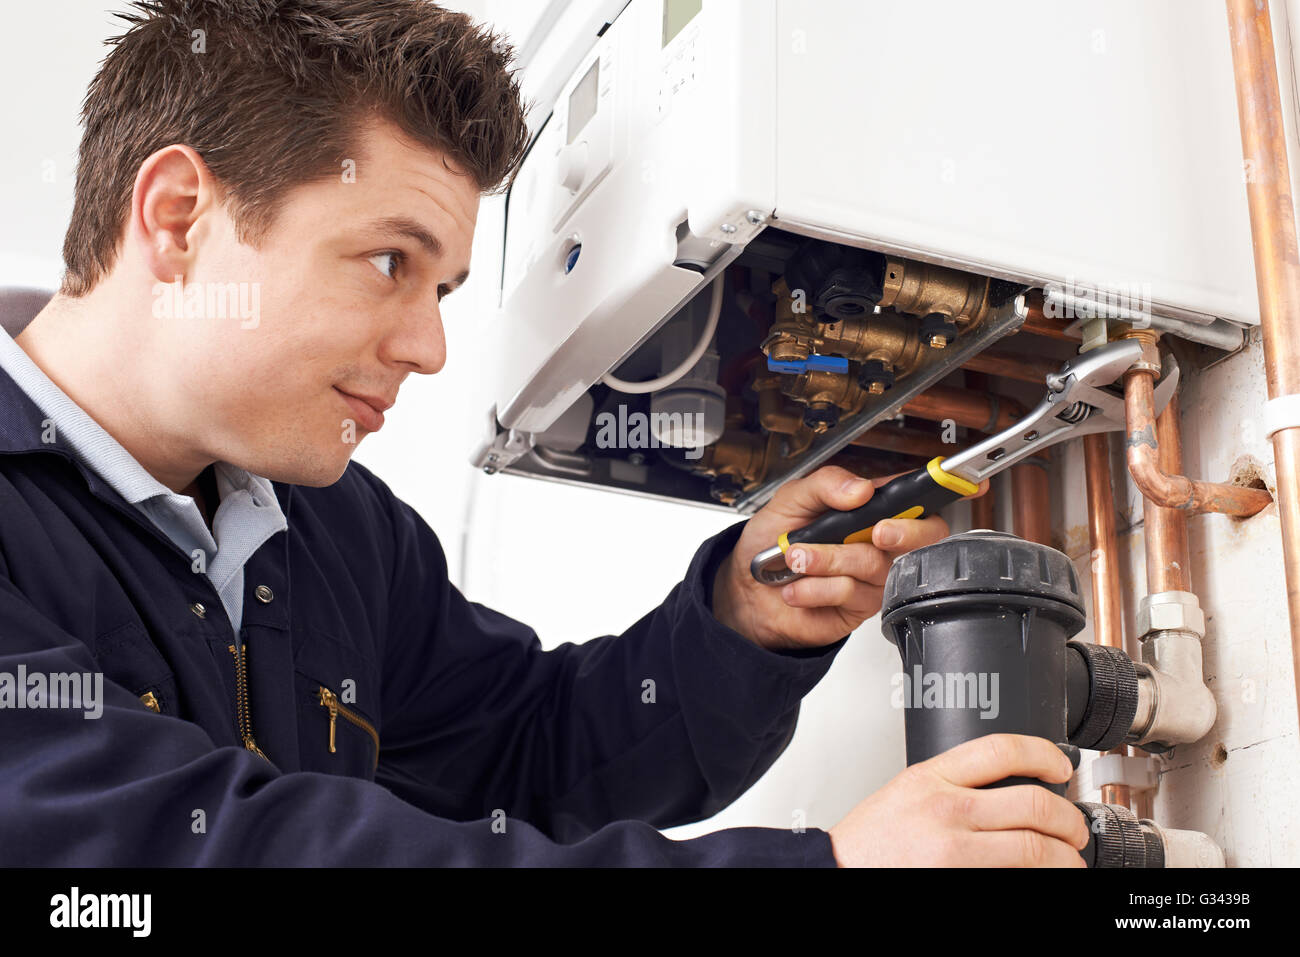 Male Plumber Working On Central Heating Boiler Stock Photo